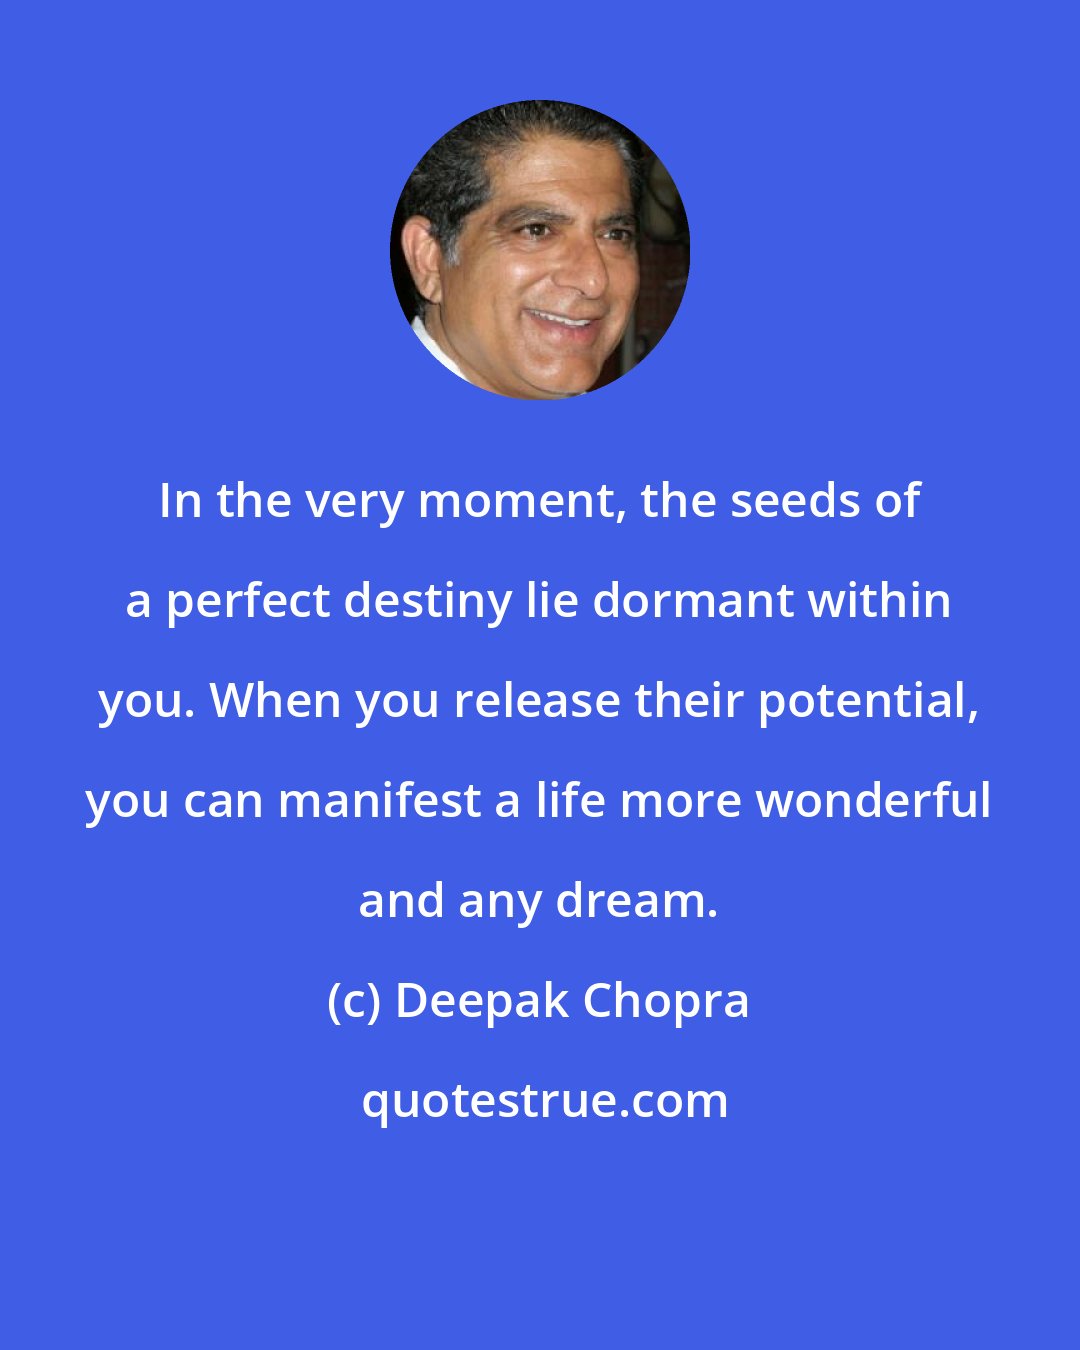 Deepak Chopra: In the very moment, the seeds of a perfect destiny lie dormant within you. When you release their potential, you can manifest a life more wonderful and any dream.